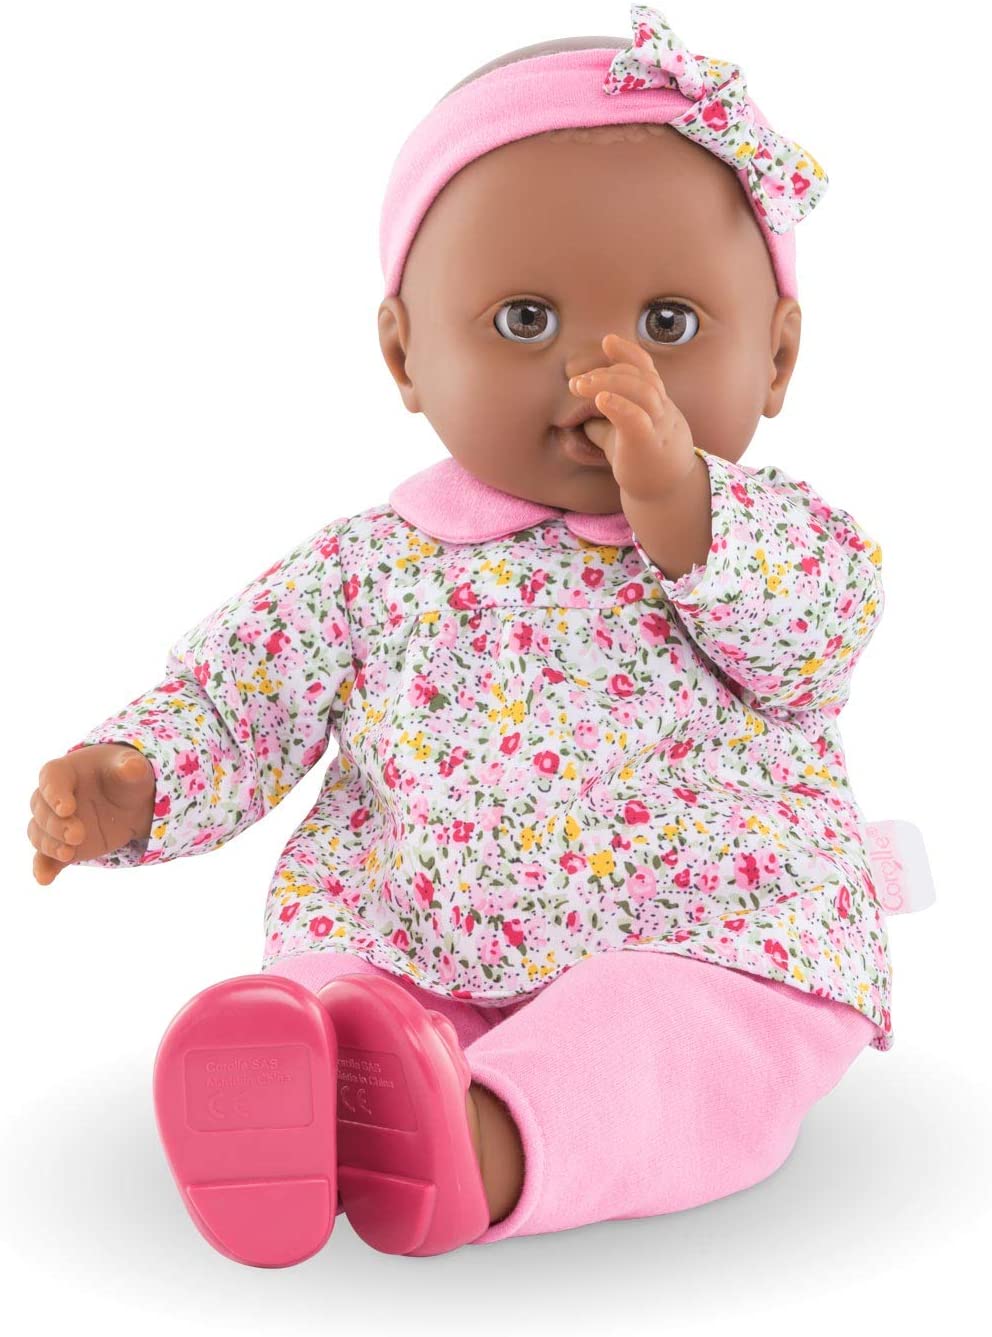 Corolle Mon Grand Poupon Lilou - 14" Toy Baby Doll for Ages 2 Years +